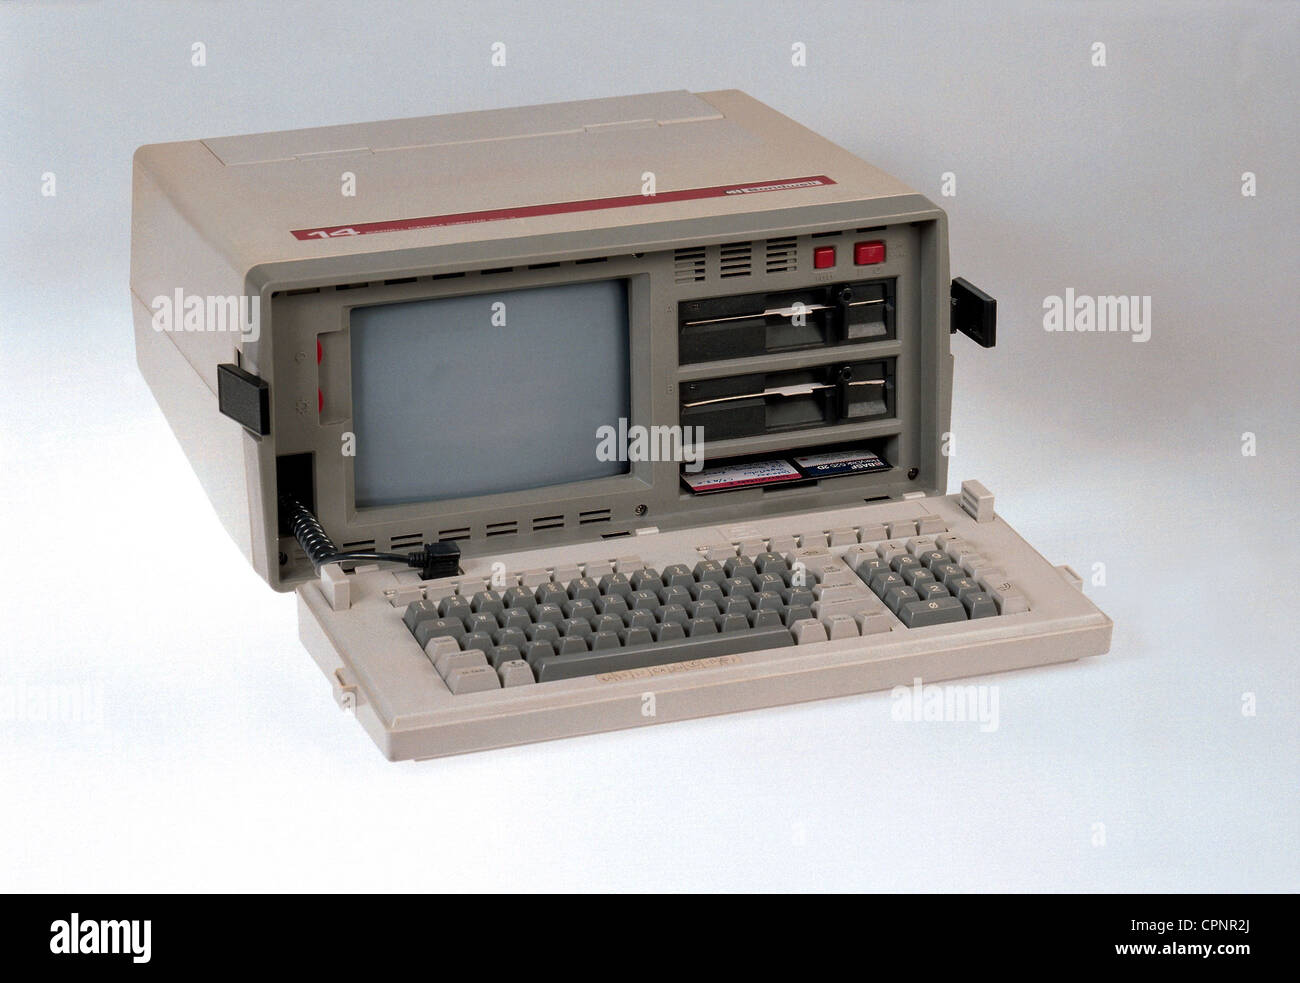 computing / electronics,computer,portable computer Bondwell 14,early laptop,USA,1984,portable computer,weight: 13 kilogram,integrated 9 inch monitor,processor Z80A with 4 megahertz,128 kilobyte random access memory,two built-in 5.25 inch floppy disk drives,operating system CP/M Plus 3.0,keyboard as casing cover,office computer,business computer,office computers,business computers,history of computer,still,object,objects,studio shot,80s,EDP,IT,hardware,personal computer,computer,computers,1980s,20th century,historic,historical,Additional-Rights-Clearences-Not Available Stock Photo